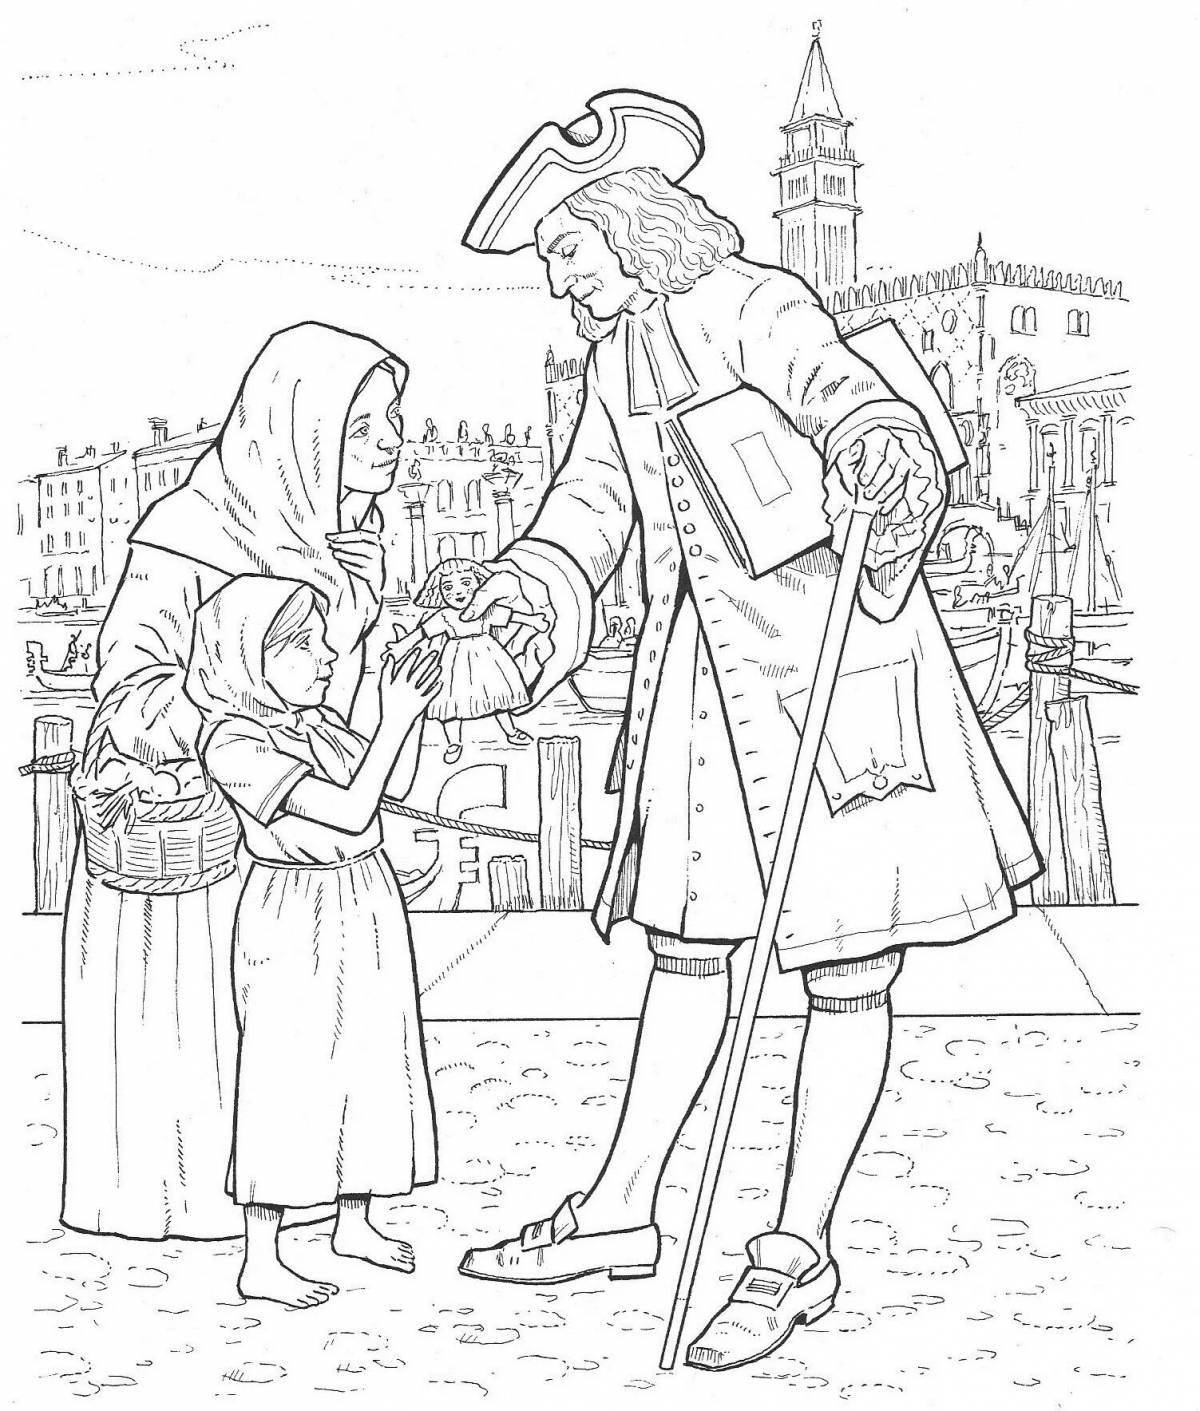 Exciting history coloring book for kids